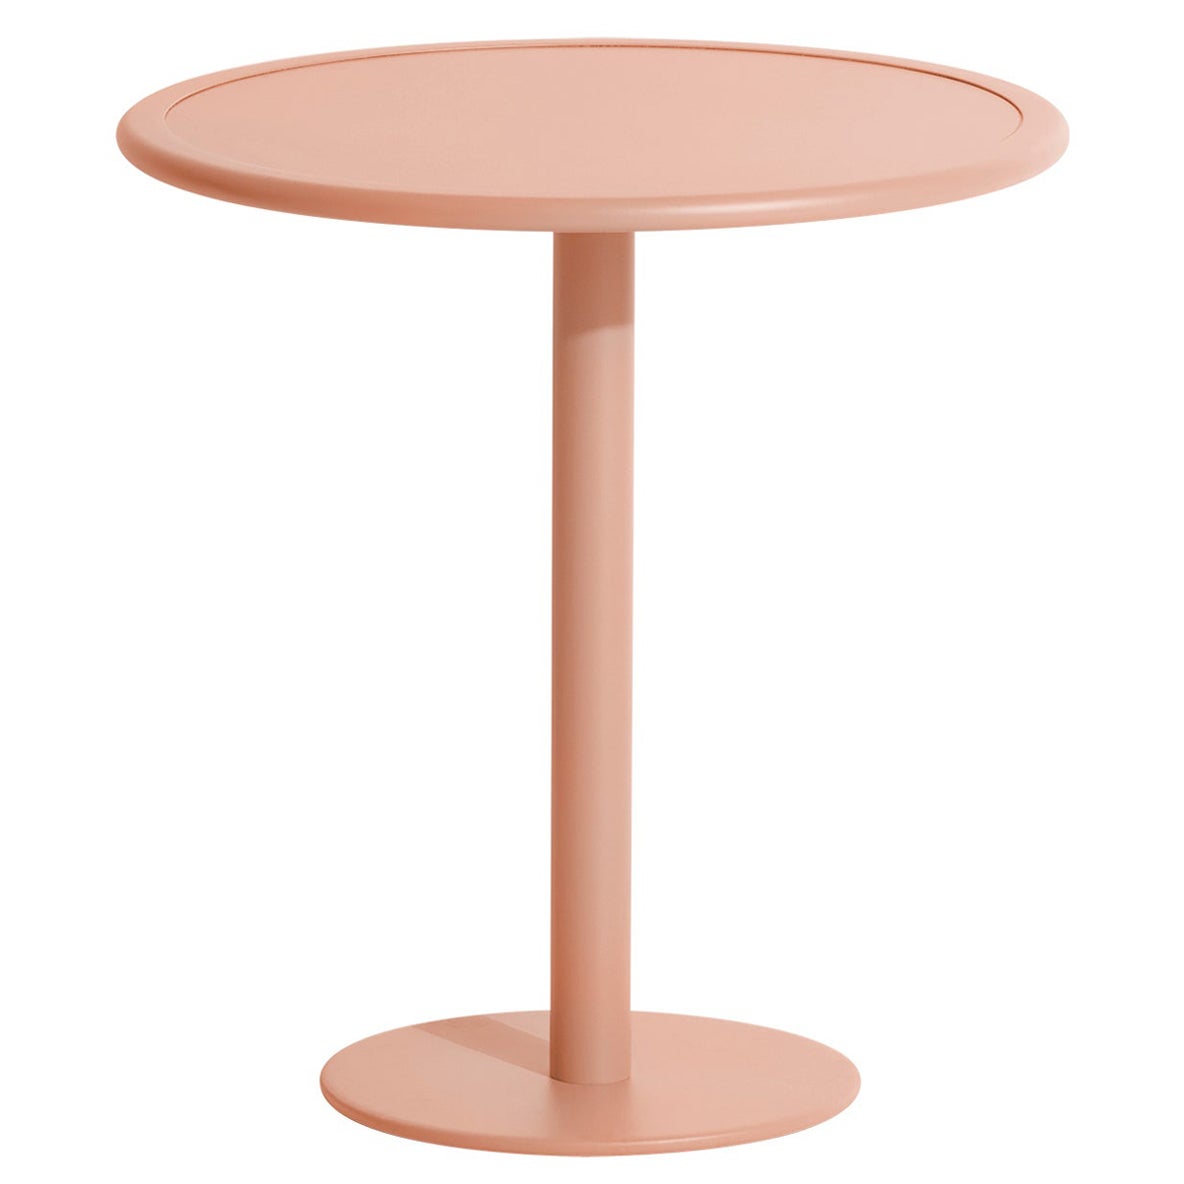 Petite Friture Week-End Bistro Round Dining Table in Blush Aluminium, 2017 For Sale